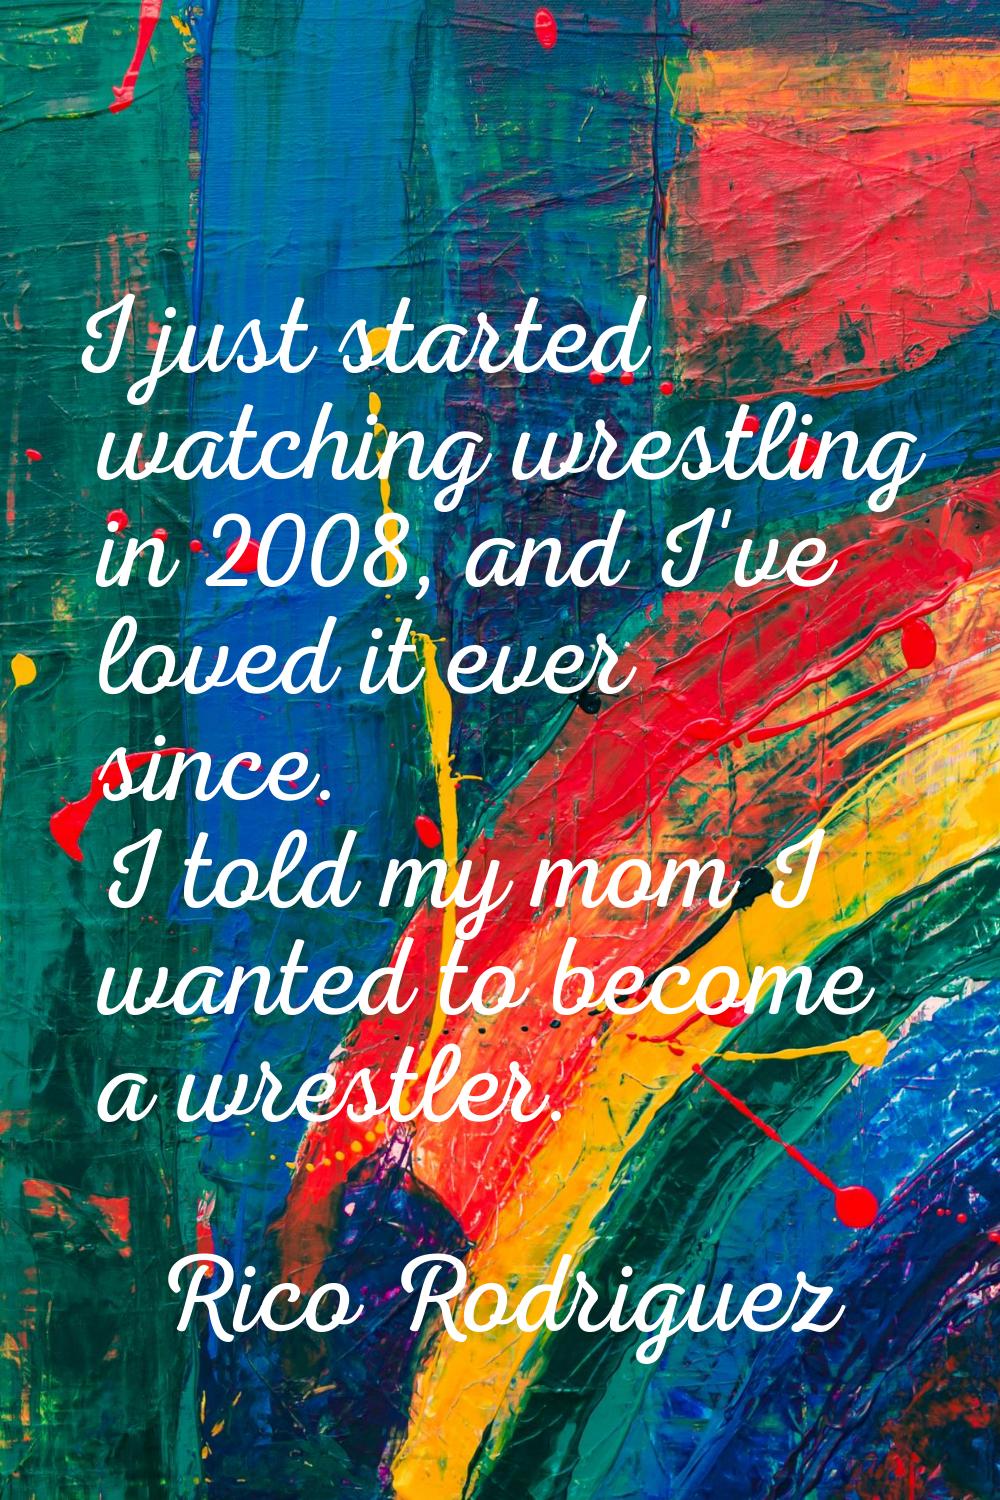 I just started watching wrestling in 2008, and I've loved it ever since. I told my mom I wanted to 